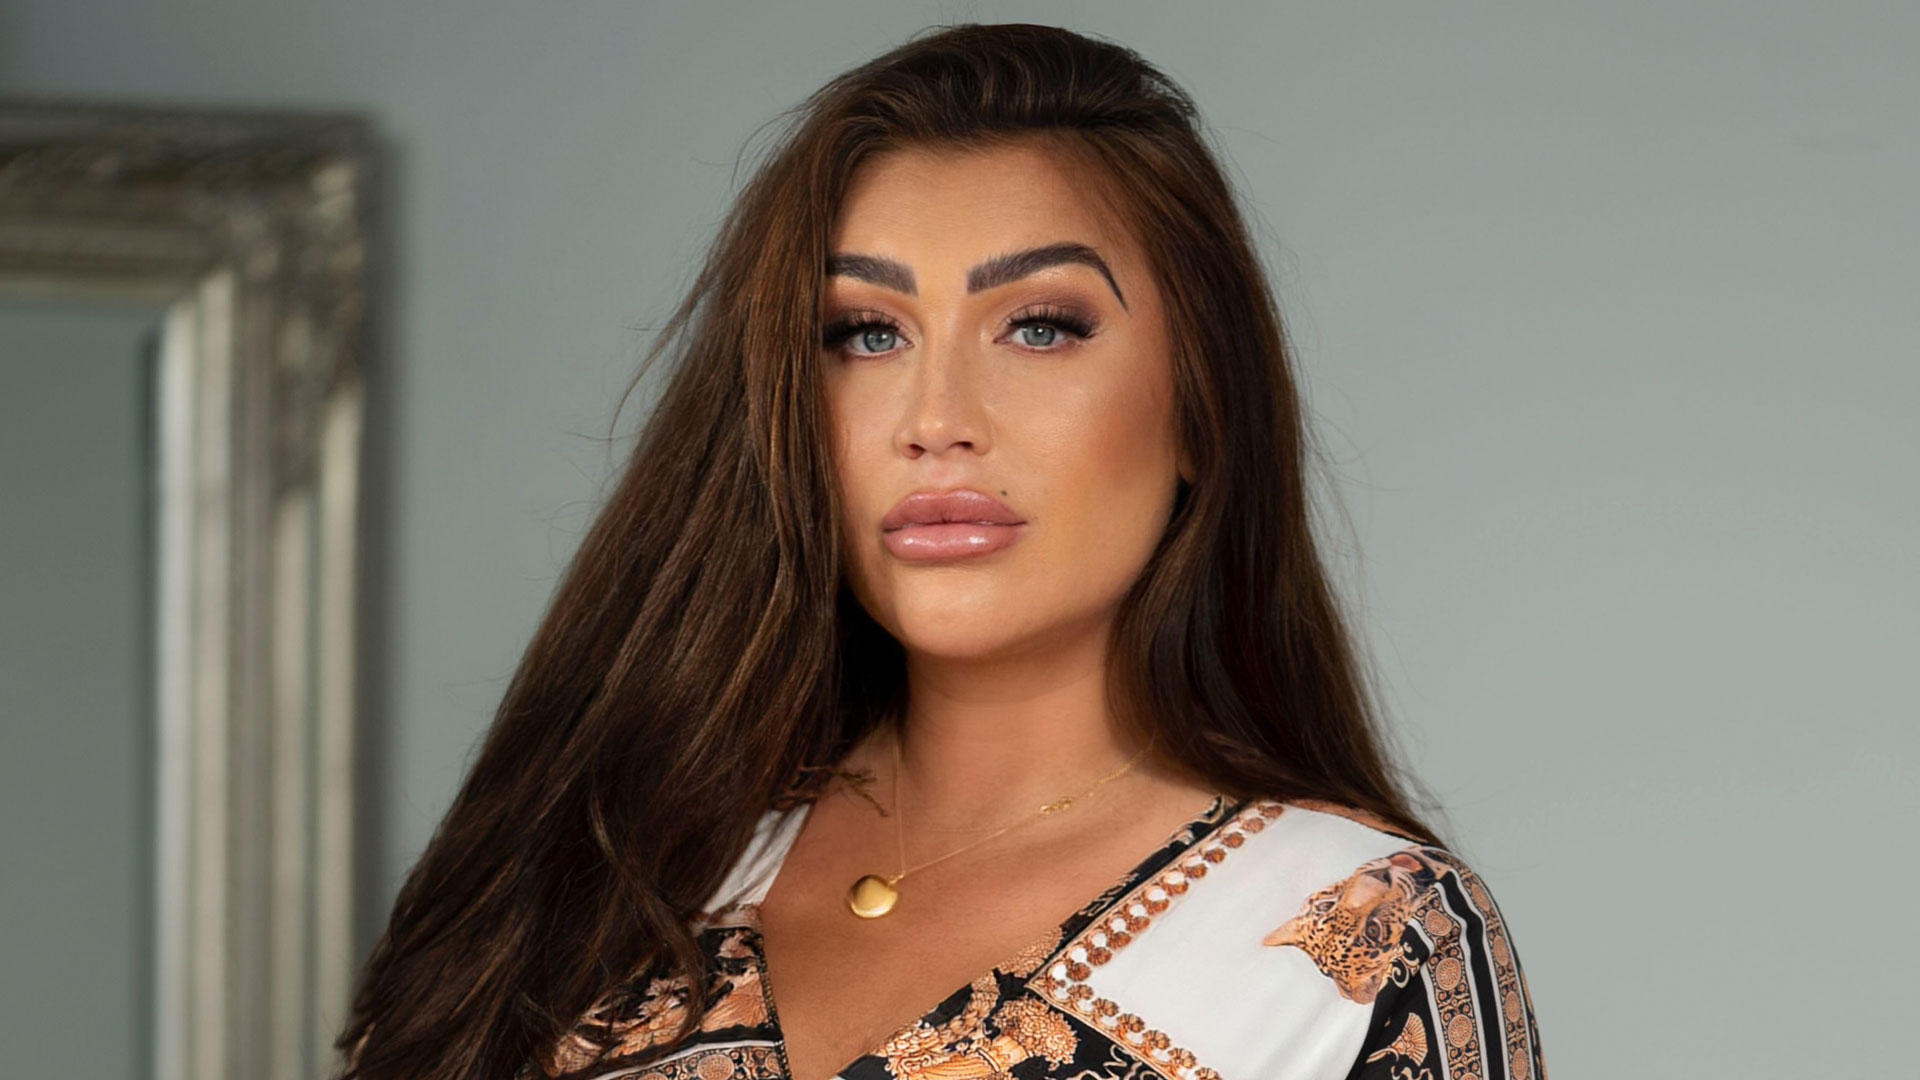 Lauren Goodger sends a touching message to her daughter, just weeks after the tragic death of her baby girl